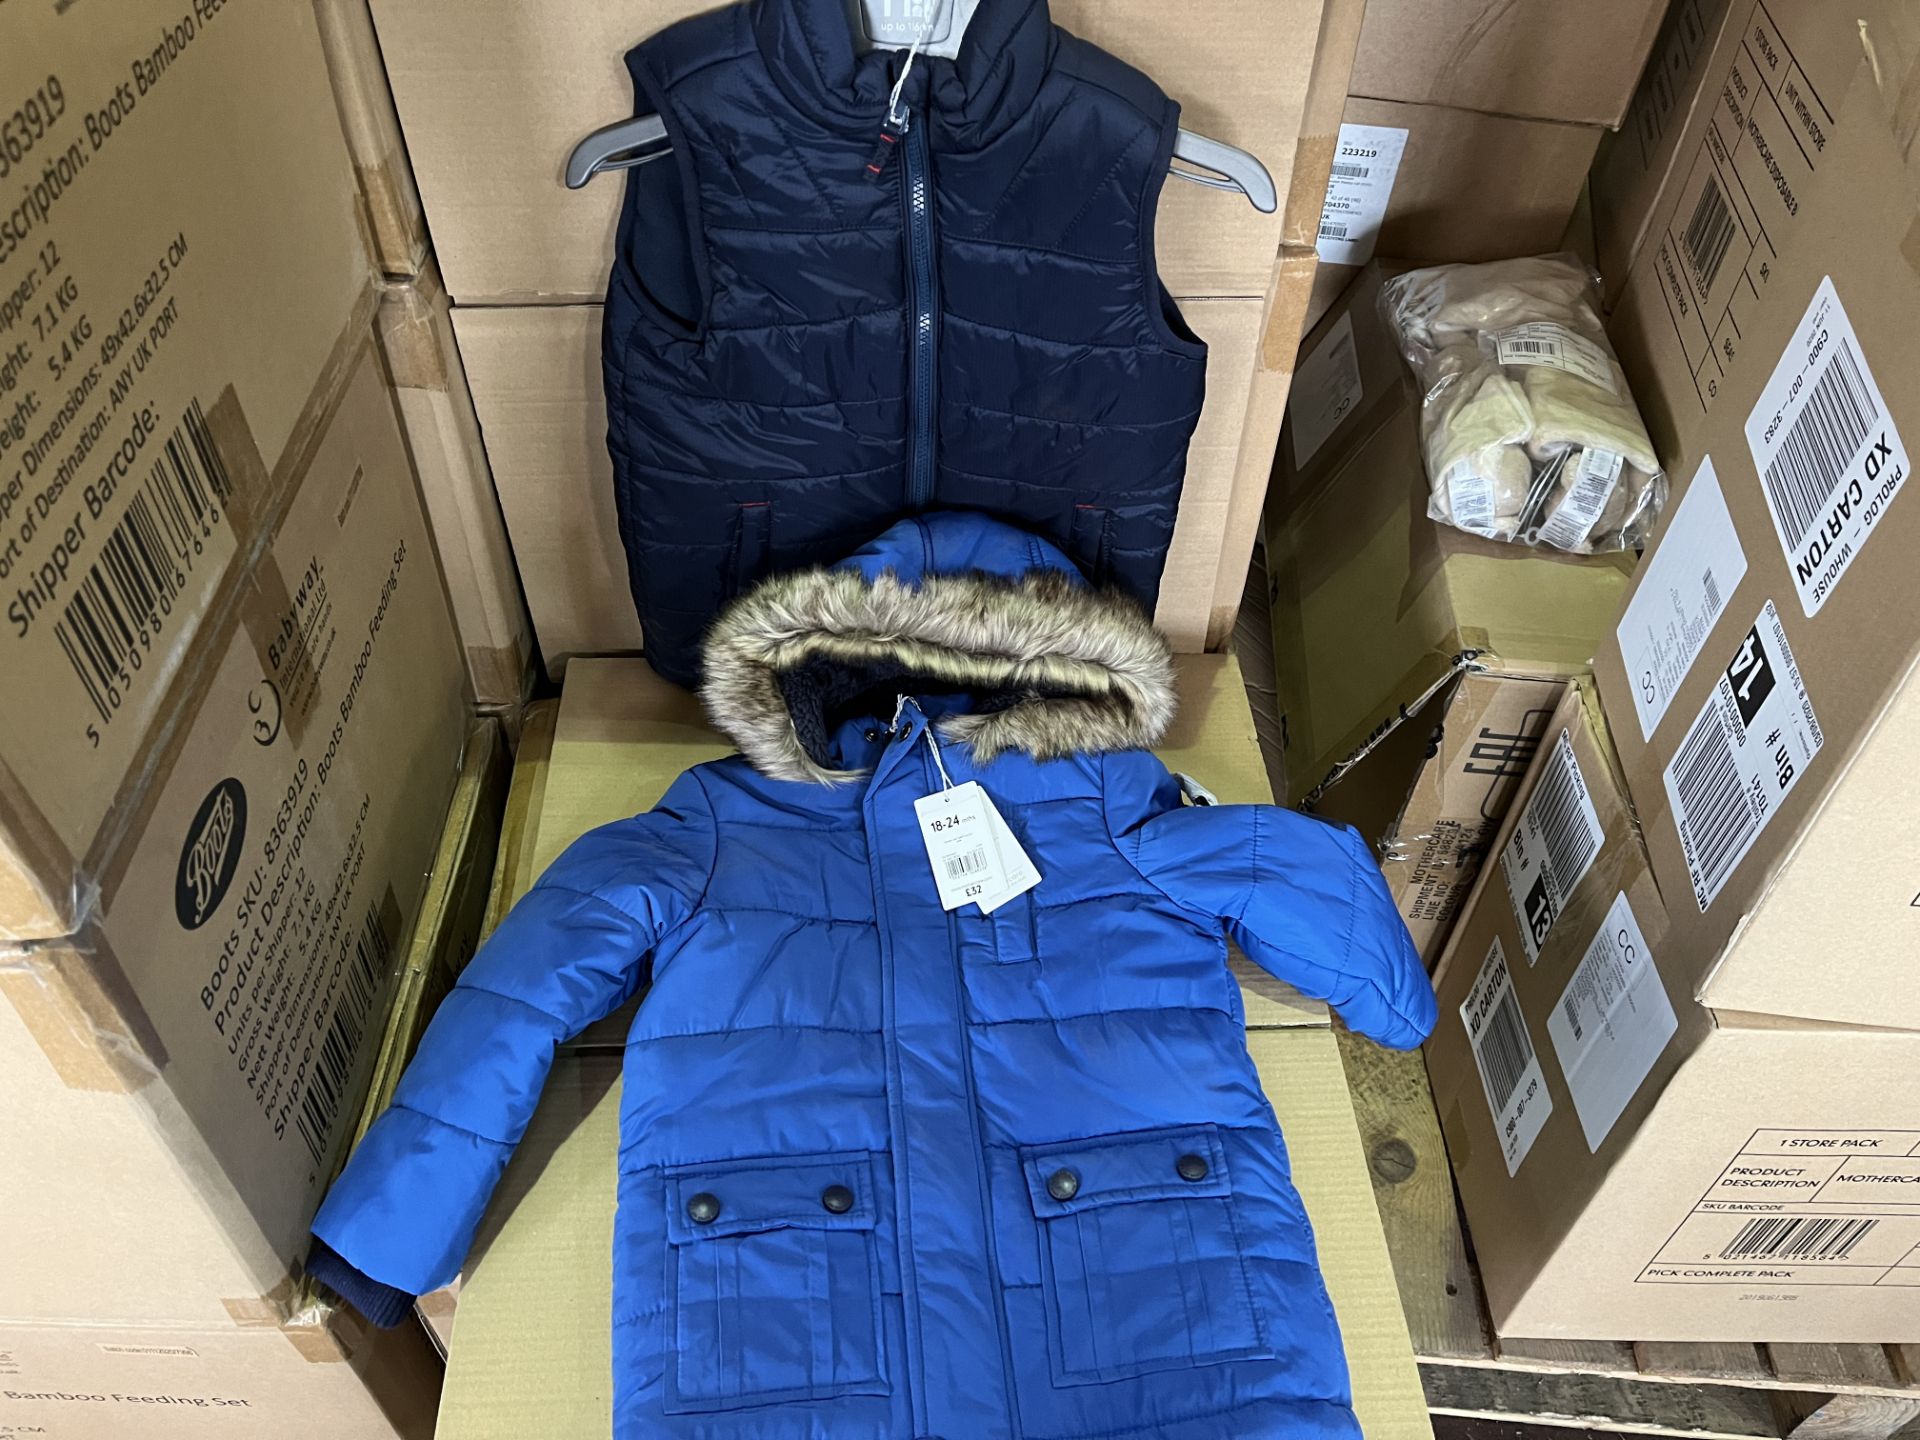 (NO VAT) 10 X BRAND NEW MOTHERCARE JACKETS IN 2 DESIGNS AND VARIOUS SIZES R15